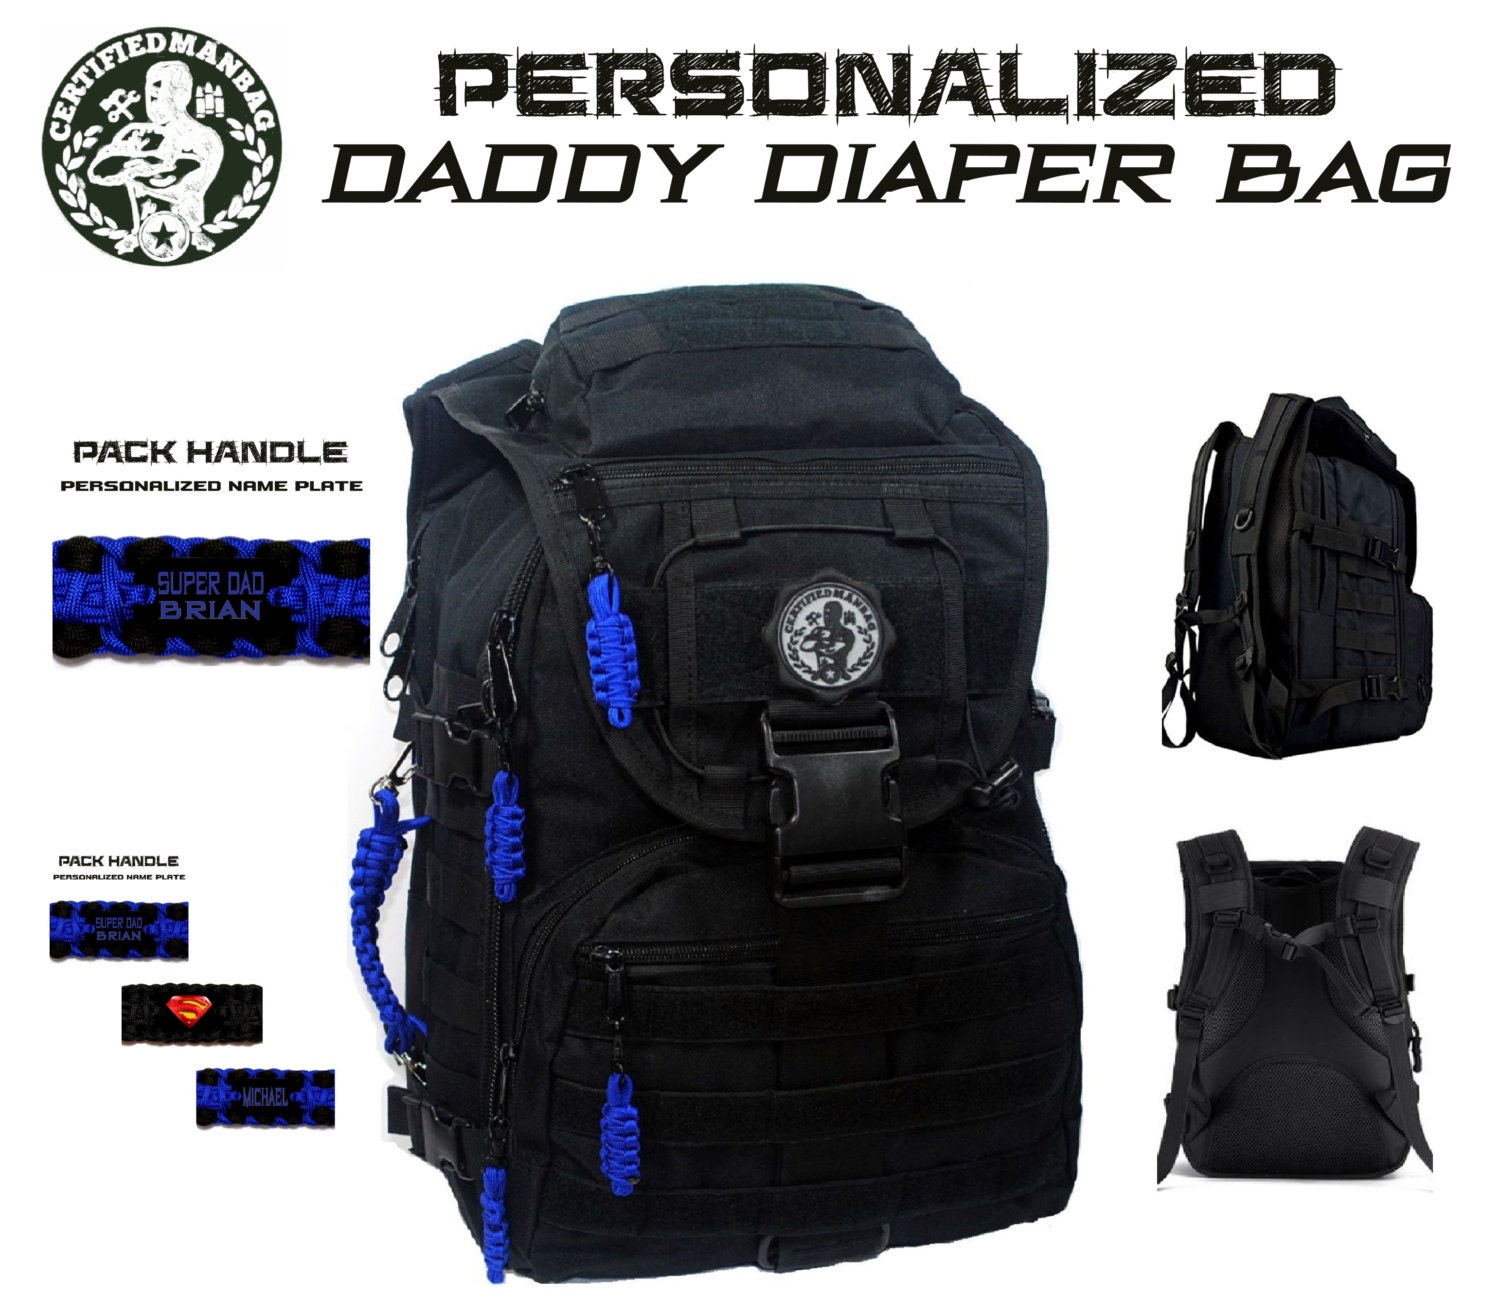 Personalized DADDY DIAPER BAG Super Dad Tactical by CYCLONEXGEAR